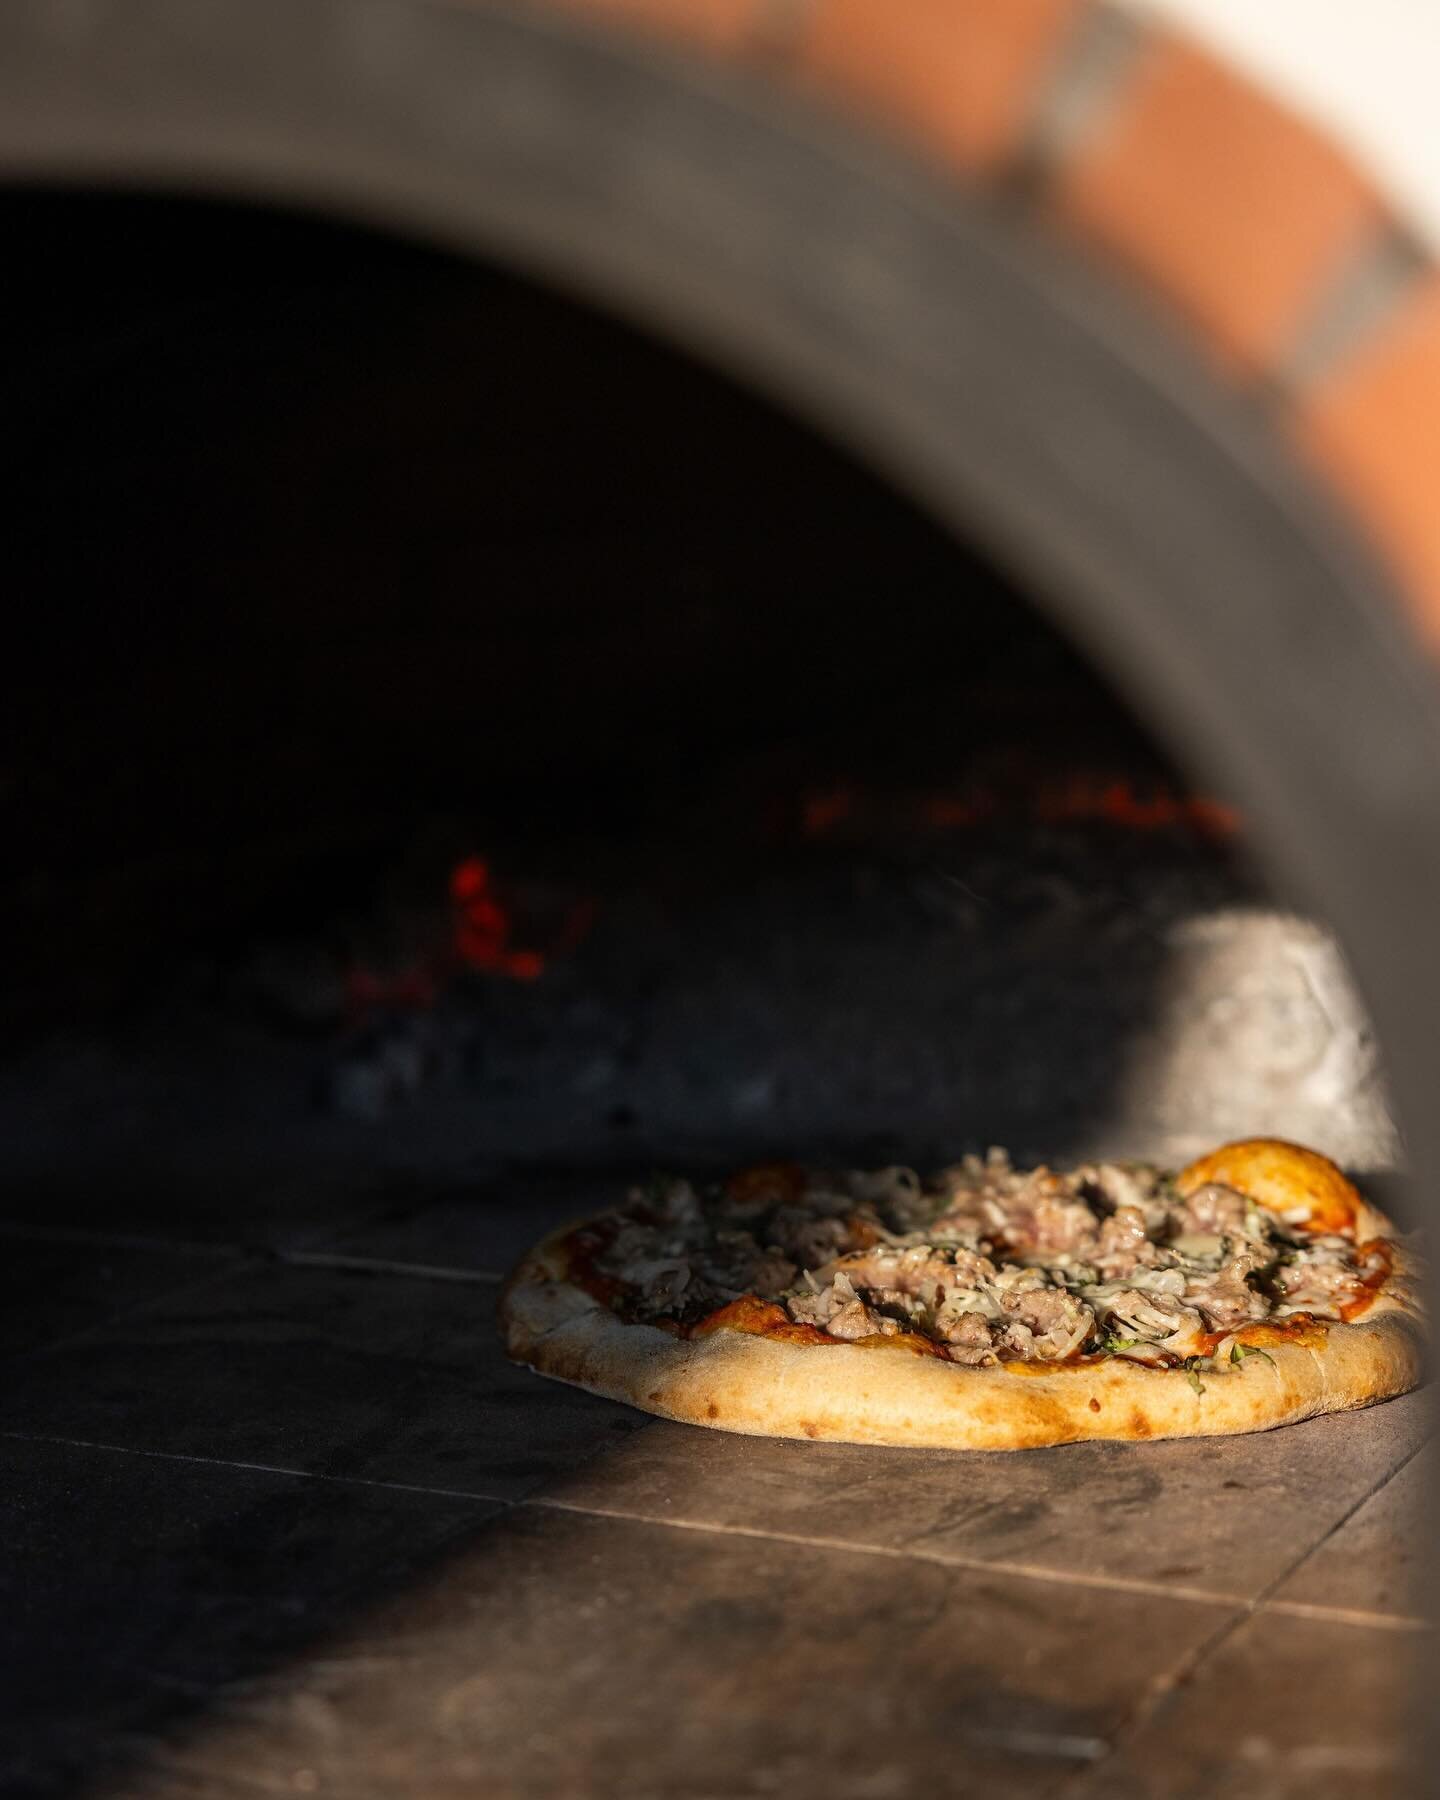 We love making pizza in our brick oven using ingredients from our farmers. Yes please!

#redcloverranch
#farmtotable
#driftless
#driftlesswisconsin 
#travelwisconsin
#retreatcenter
#brickown
#forneauoven